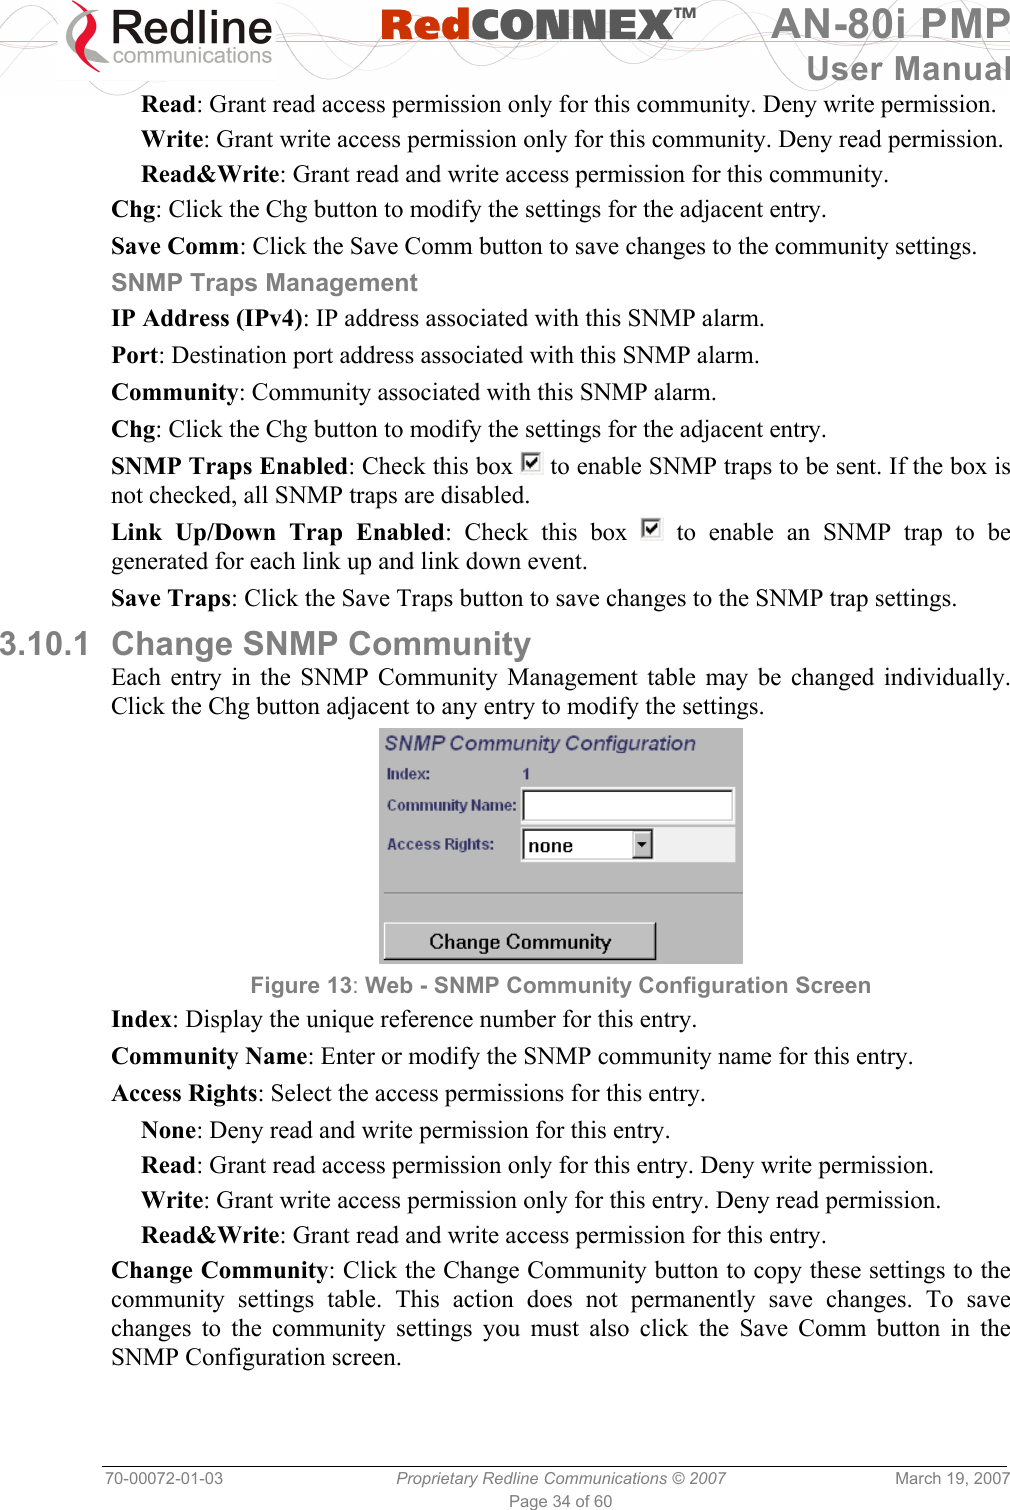   RedCONNEXTM AN-80i PMP User Manual 70-00072-01-03  Proprietary Redline Communications © 2007  March 19, 2007 Page 34 of 60 Read: Grant read access permission only for this community. Deny write permission. Write: Grant write access permission only for this community. Deny read permission. Read&amp;Write: Grant read and write access permission for this community. Chg: Click the Chg button to modify the settings for the adjacent entry. Save Comm: Click the Save Comm button to save changes to the community settings. SNMP Traps Management IP Address (IPv4): IP address associated with this SNMP alarm. Port: Destination port address associated with this SNMP alarm. Community: Community associated with this SNMP alarm. Chg: Click the Chg button to modify the settings for the adjacent entry. SNMP Traps Enabled: Check this box   to enable SNMP traps to be sent. If the box is not checked, all SNMP traps are disabled. Link Up/Down Trap Enabled: Check this box   to enable an SNMP trap to be generated for each link up and link down event. Save Traps: Click the Save Traps button to save changes to the SNMP trap settings. 3.10.1  Change SNMP Community Each entry in the SNMP Community Management table may be changed individually. Click the Chg button adjacent to any entry to modify the settings.  Figure 13: Web - SNMP Community Configuration Screen  Index: Display the unique reference number for this entry. Community Name: Enter or modify the SNMP community name for this entry. Access Rights: Select the access permissions for this entry. None: Deny read and write permission for this entry. Read: Grant read access permission only for this entry. Deny write permission. Write: Grant write access permission only for this entry. Deny read permission. Read&amp;Write: Grant read and write access permission for this entry. Change Community: Click the Change Community button to copy these settings to the community settings table. This action does not permanently save changes. To save changes to the community settings you must also click the Save Comm button in the SNMP Configuration screen. 